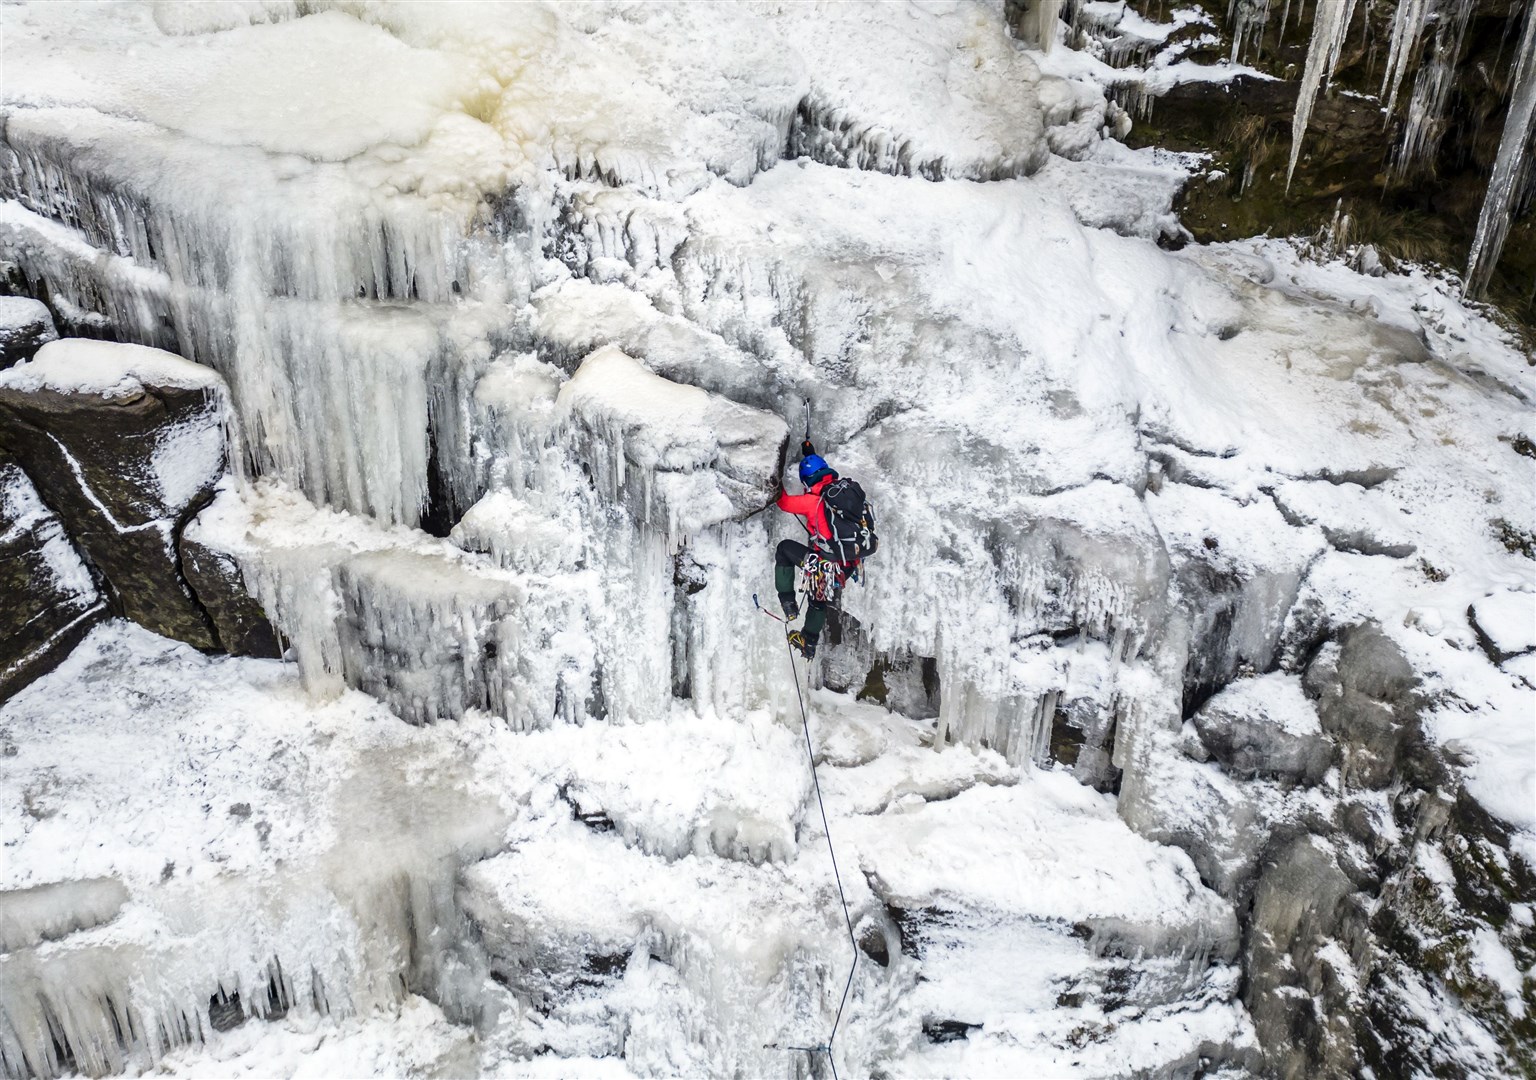 A man goes ice climbing on the frozen Kinder Downfall, High Peak in Derbyshire (Danny Lawson/PA)